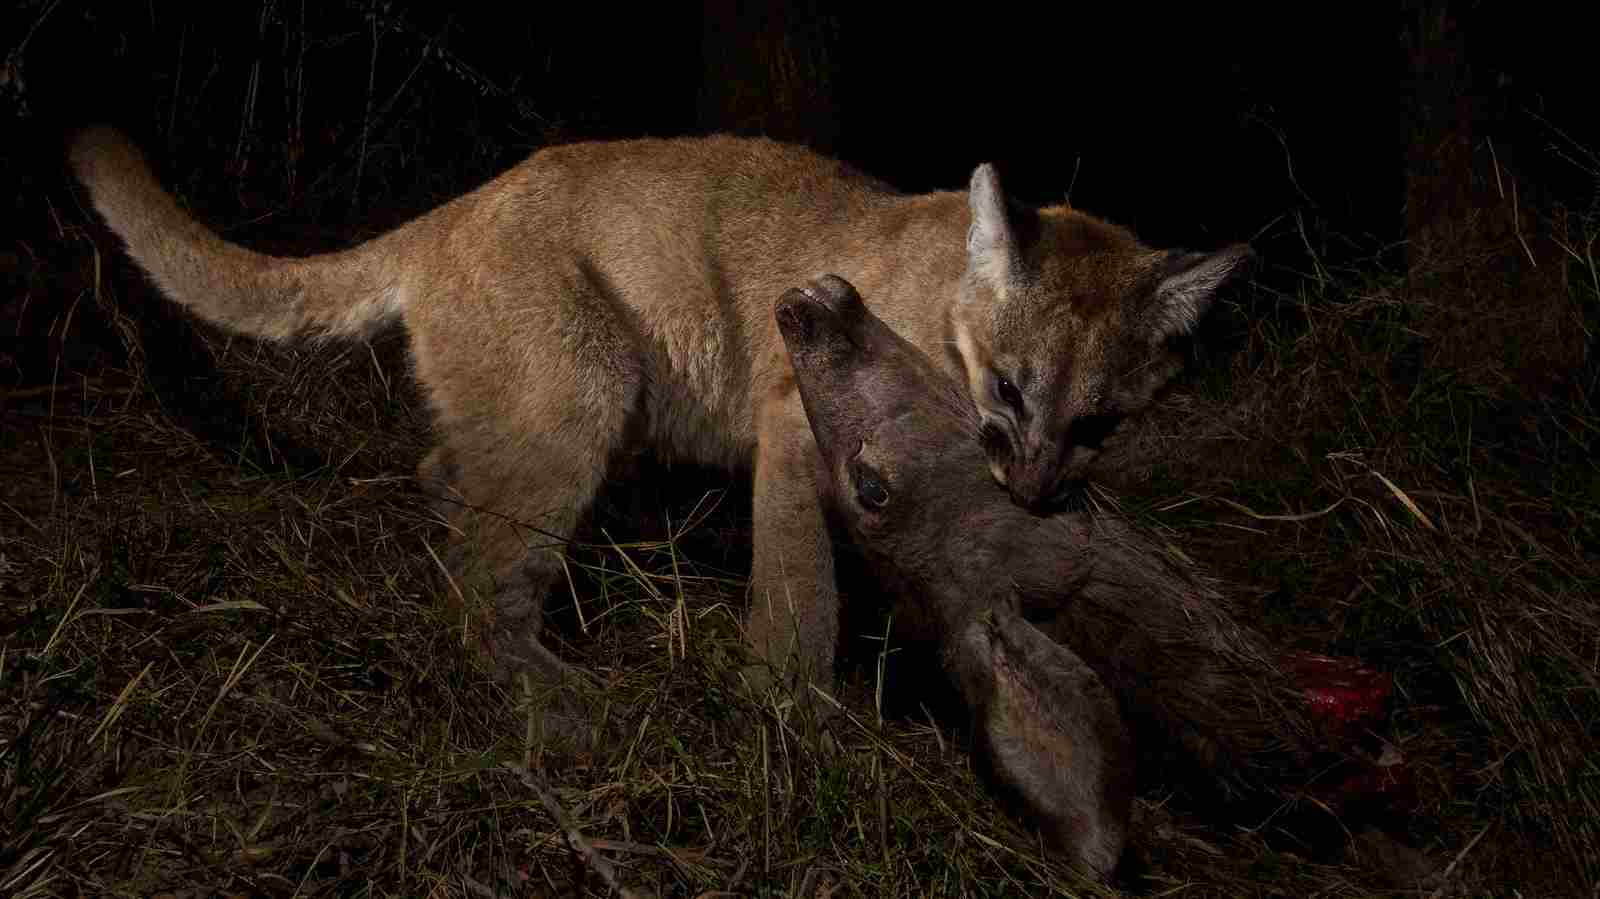 What Type of Consumer is a Mountain Lion: By Feeding On both Primary and Secondary Consumers, Mountain Lions Position Themselves as Tertiary Consumers in e Ecosystem (Credit: Santa Monica Mountains National Recreation Area 2014)